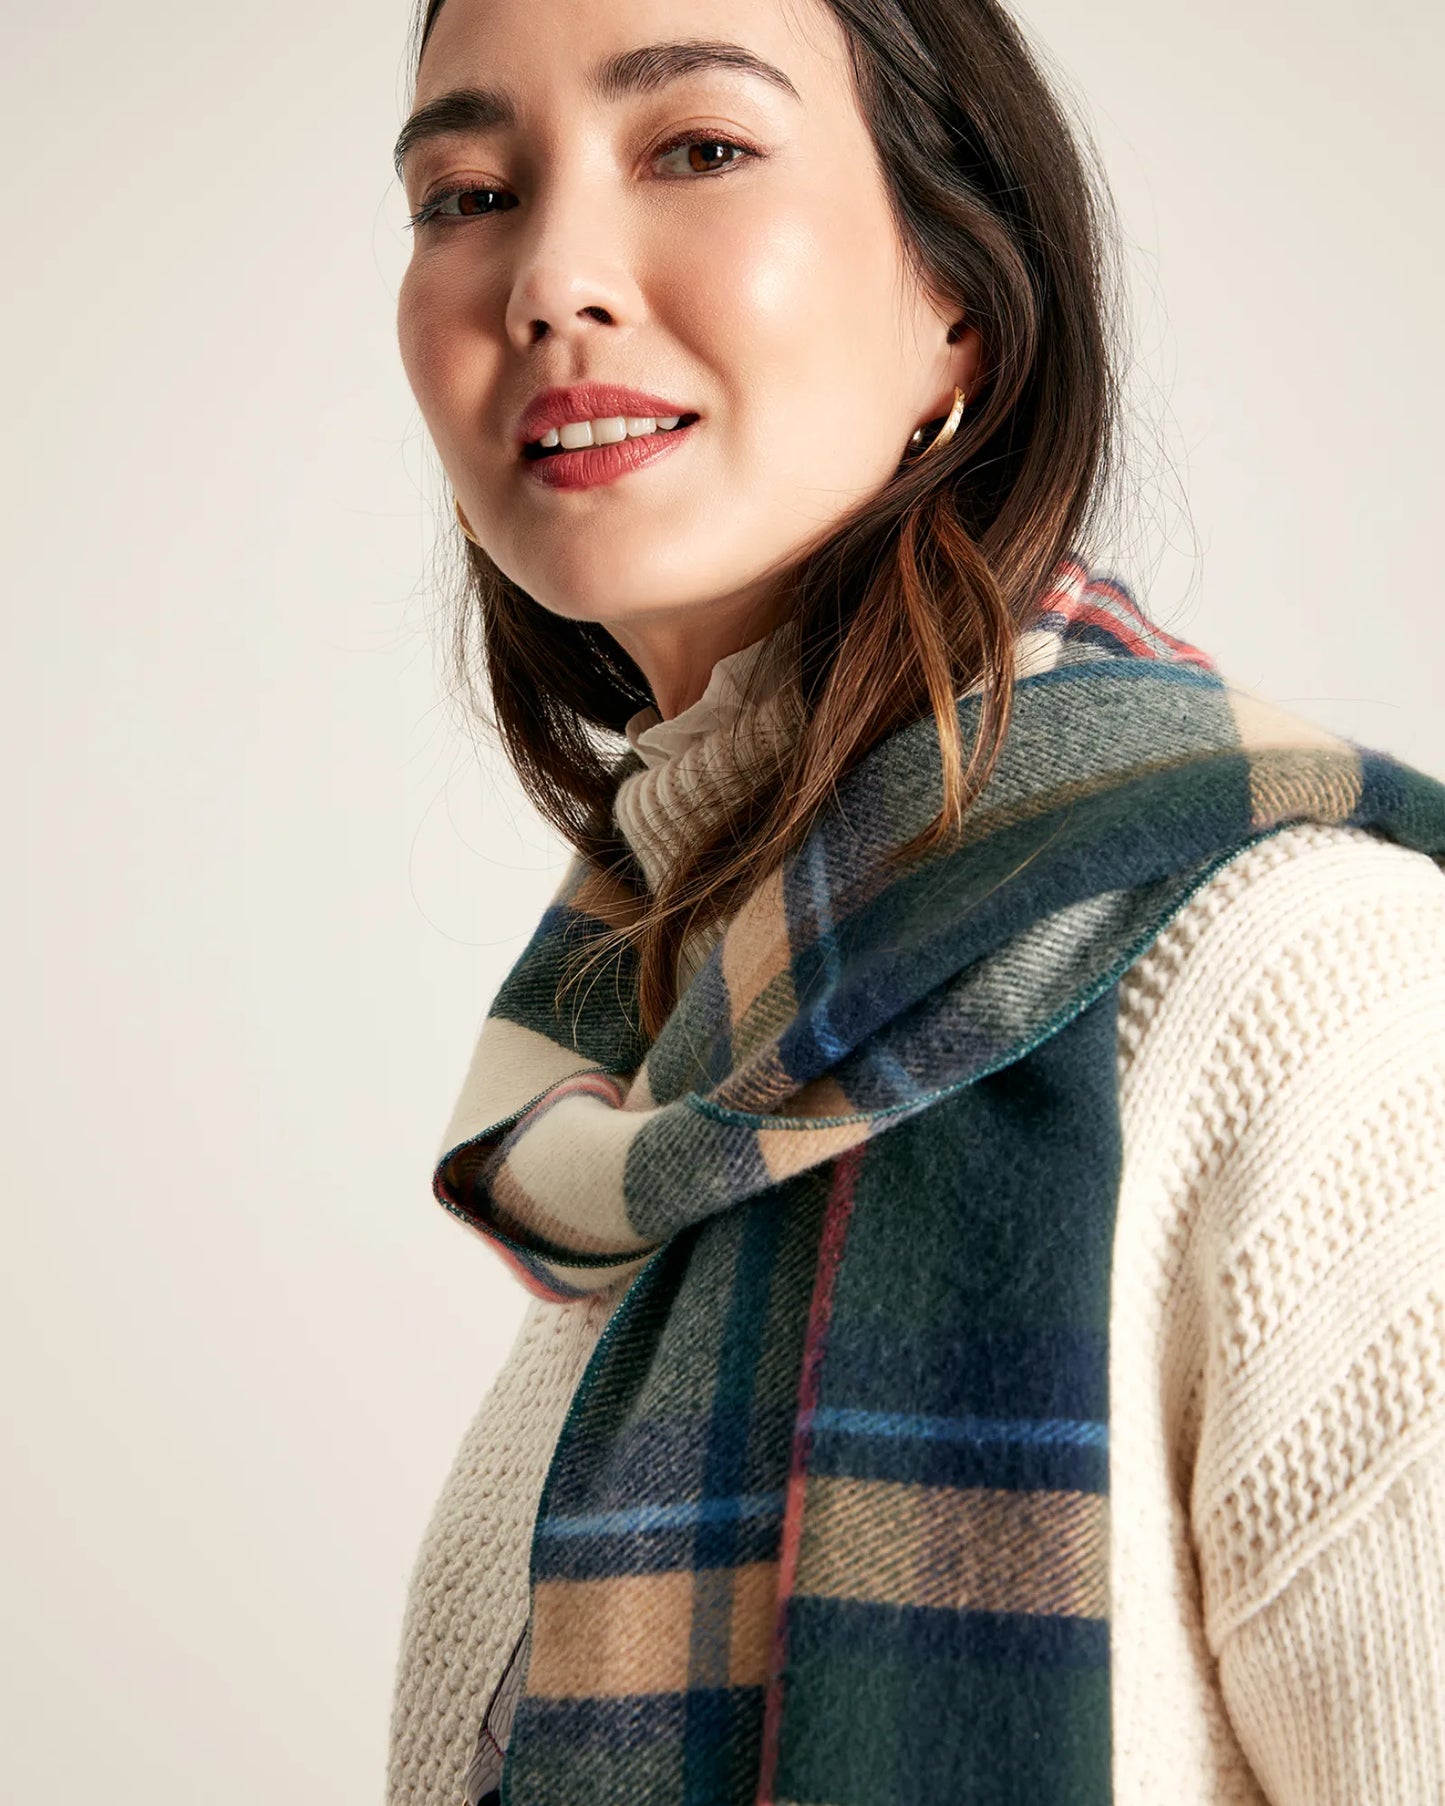 Langtree Scarf - Green Check